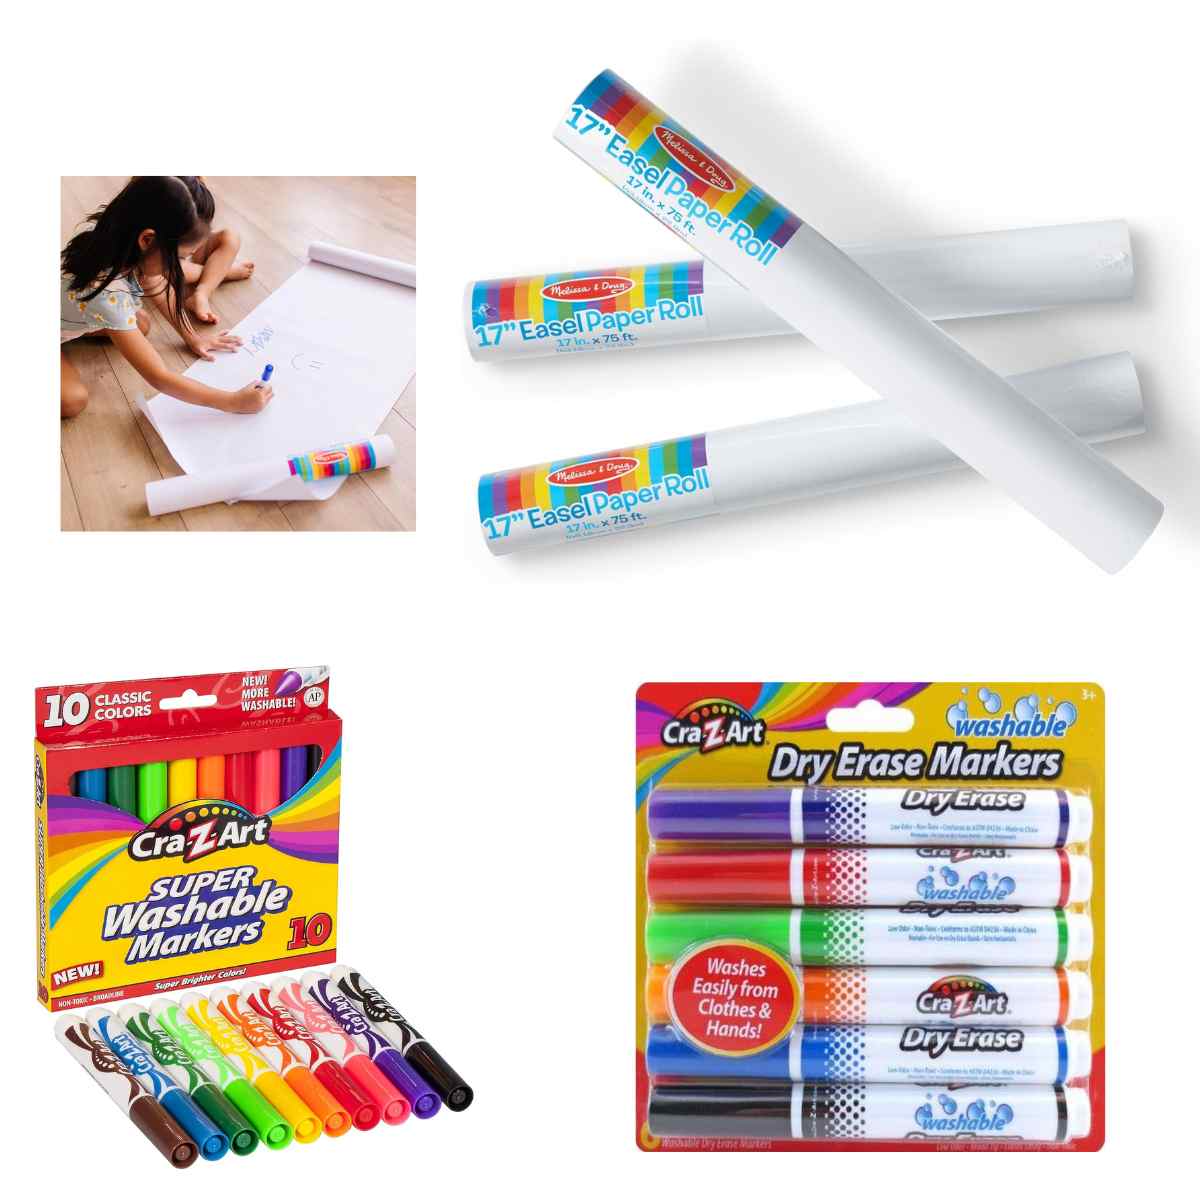 Cra-Z-Art Classic Super Washable Markers 10 in Pack More Washable